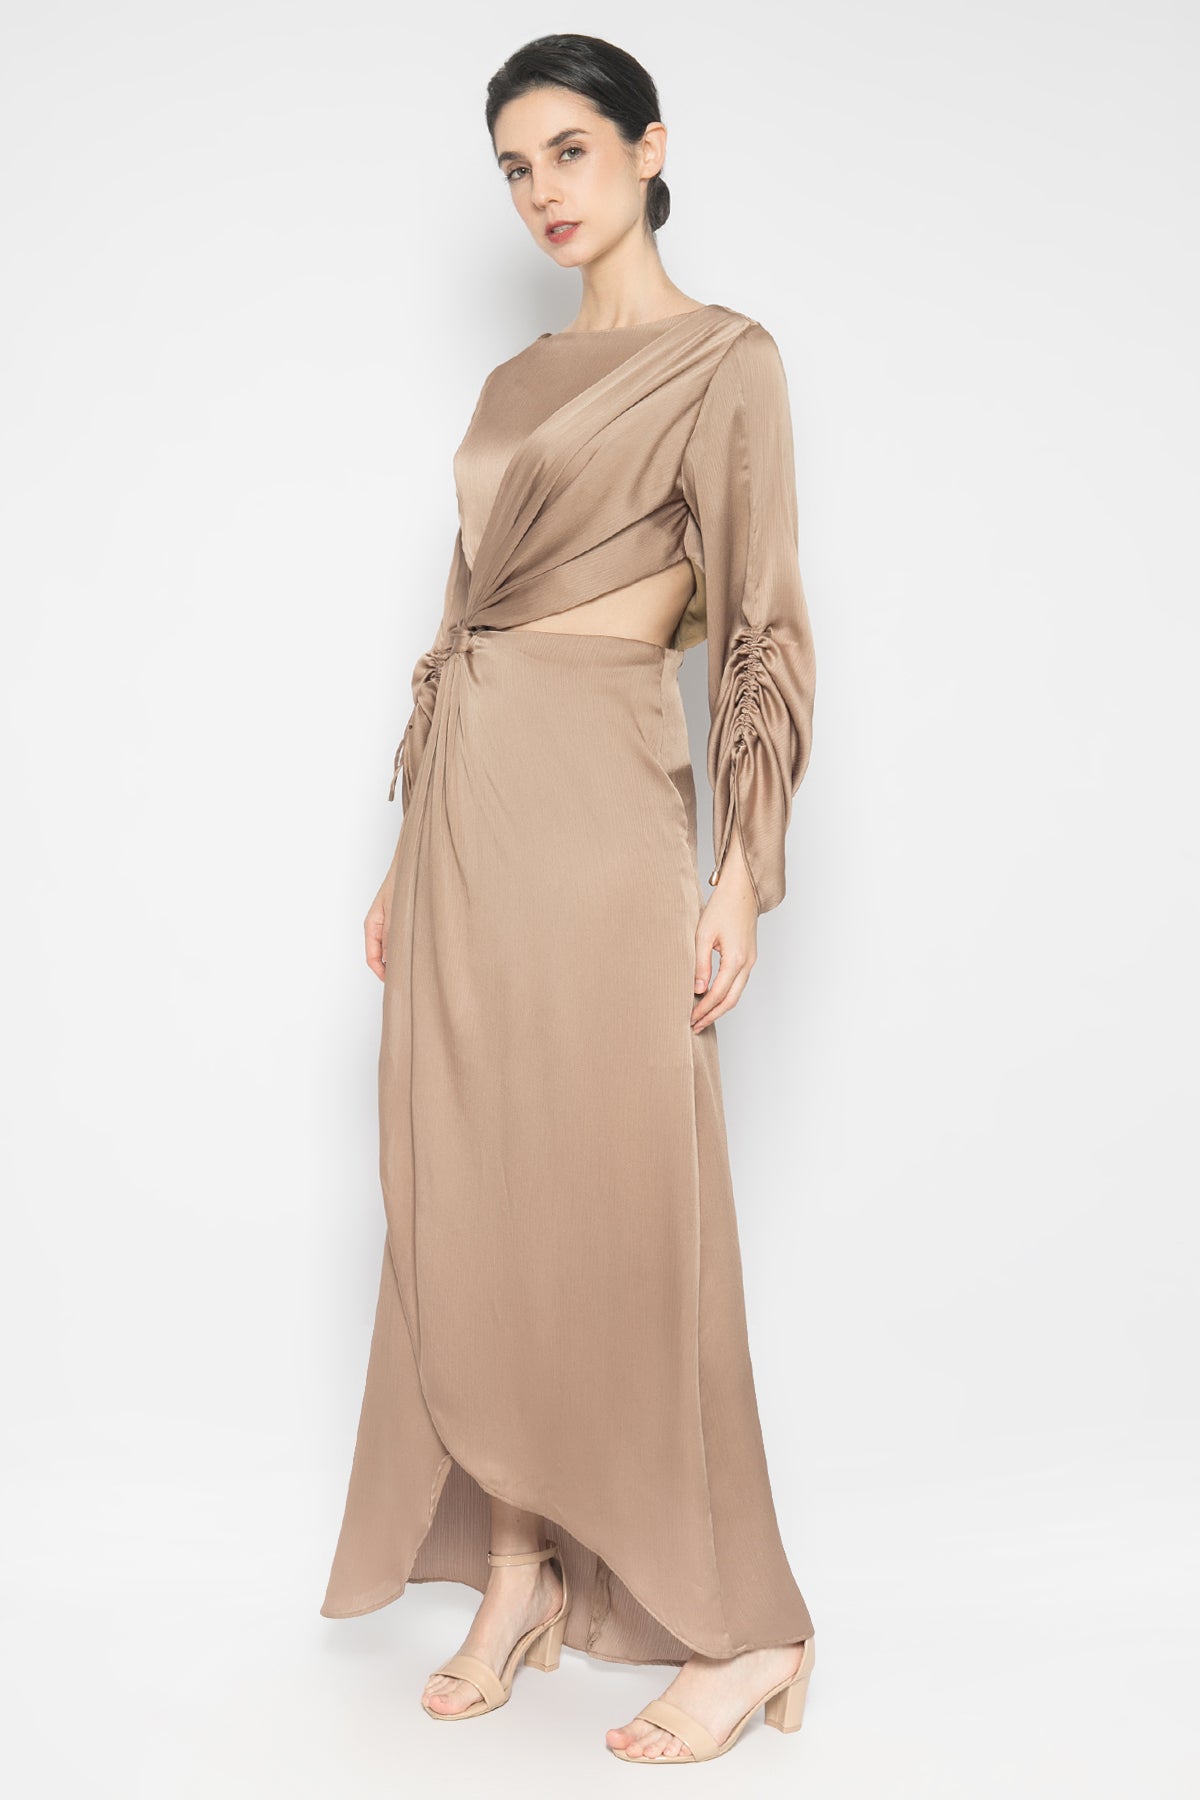 Darby Dress in Brown